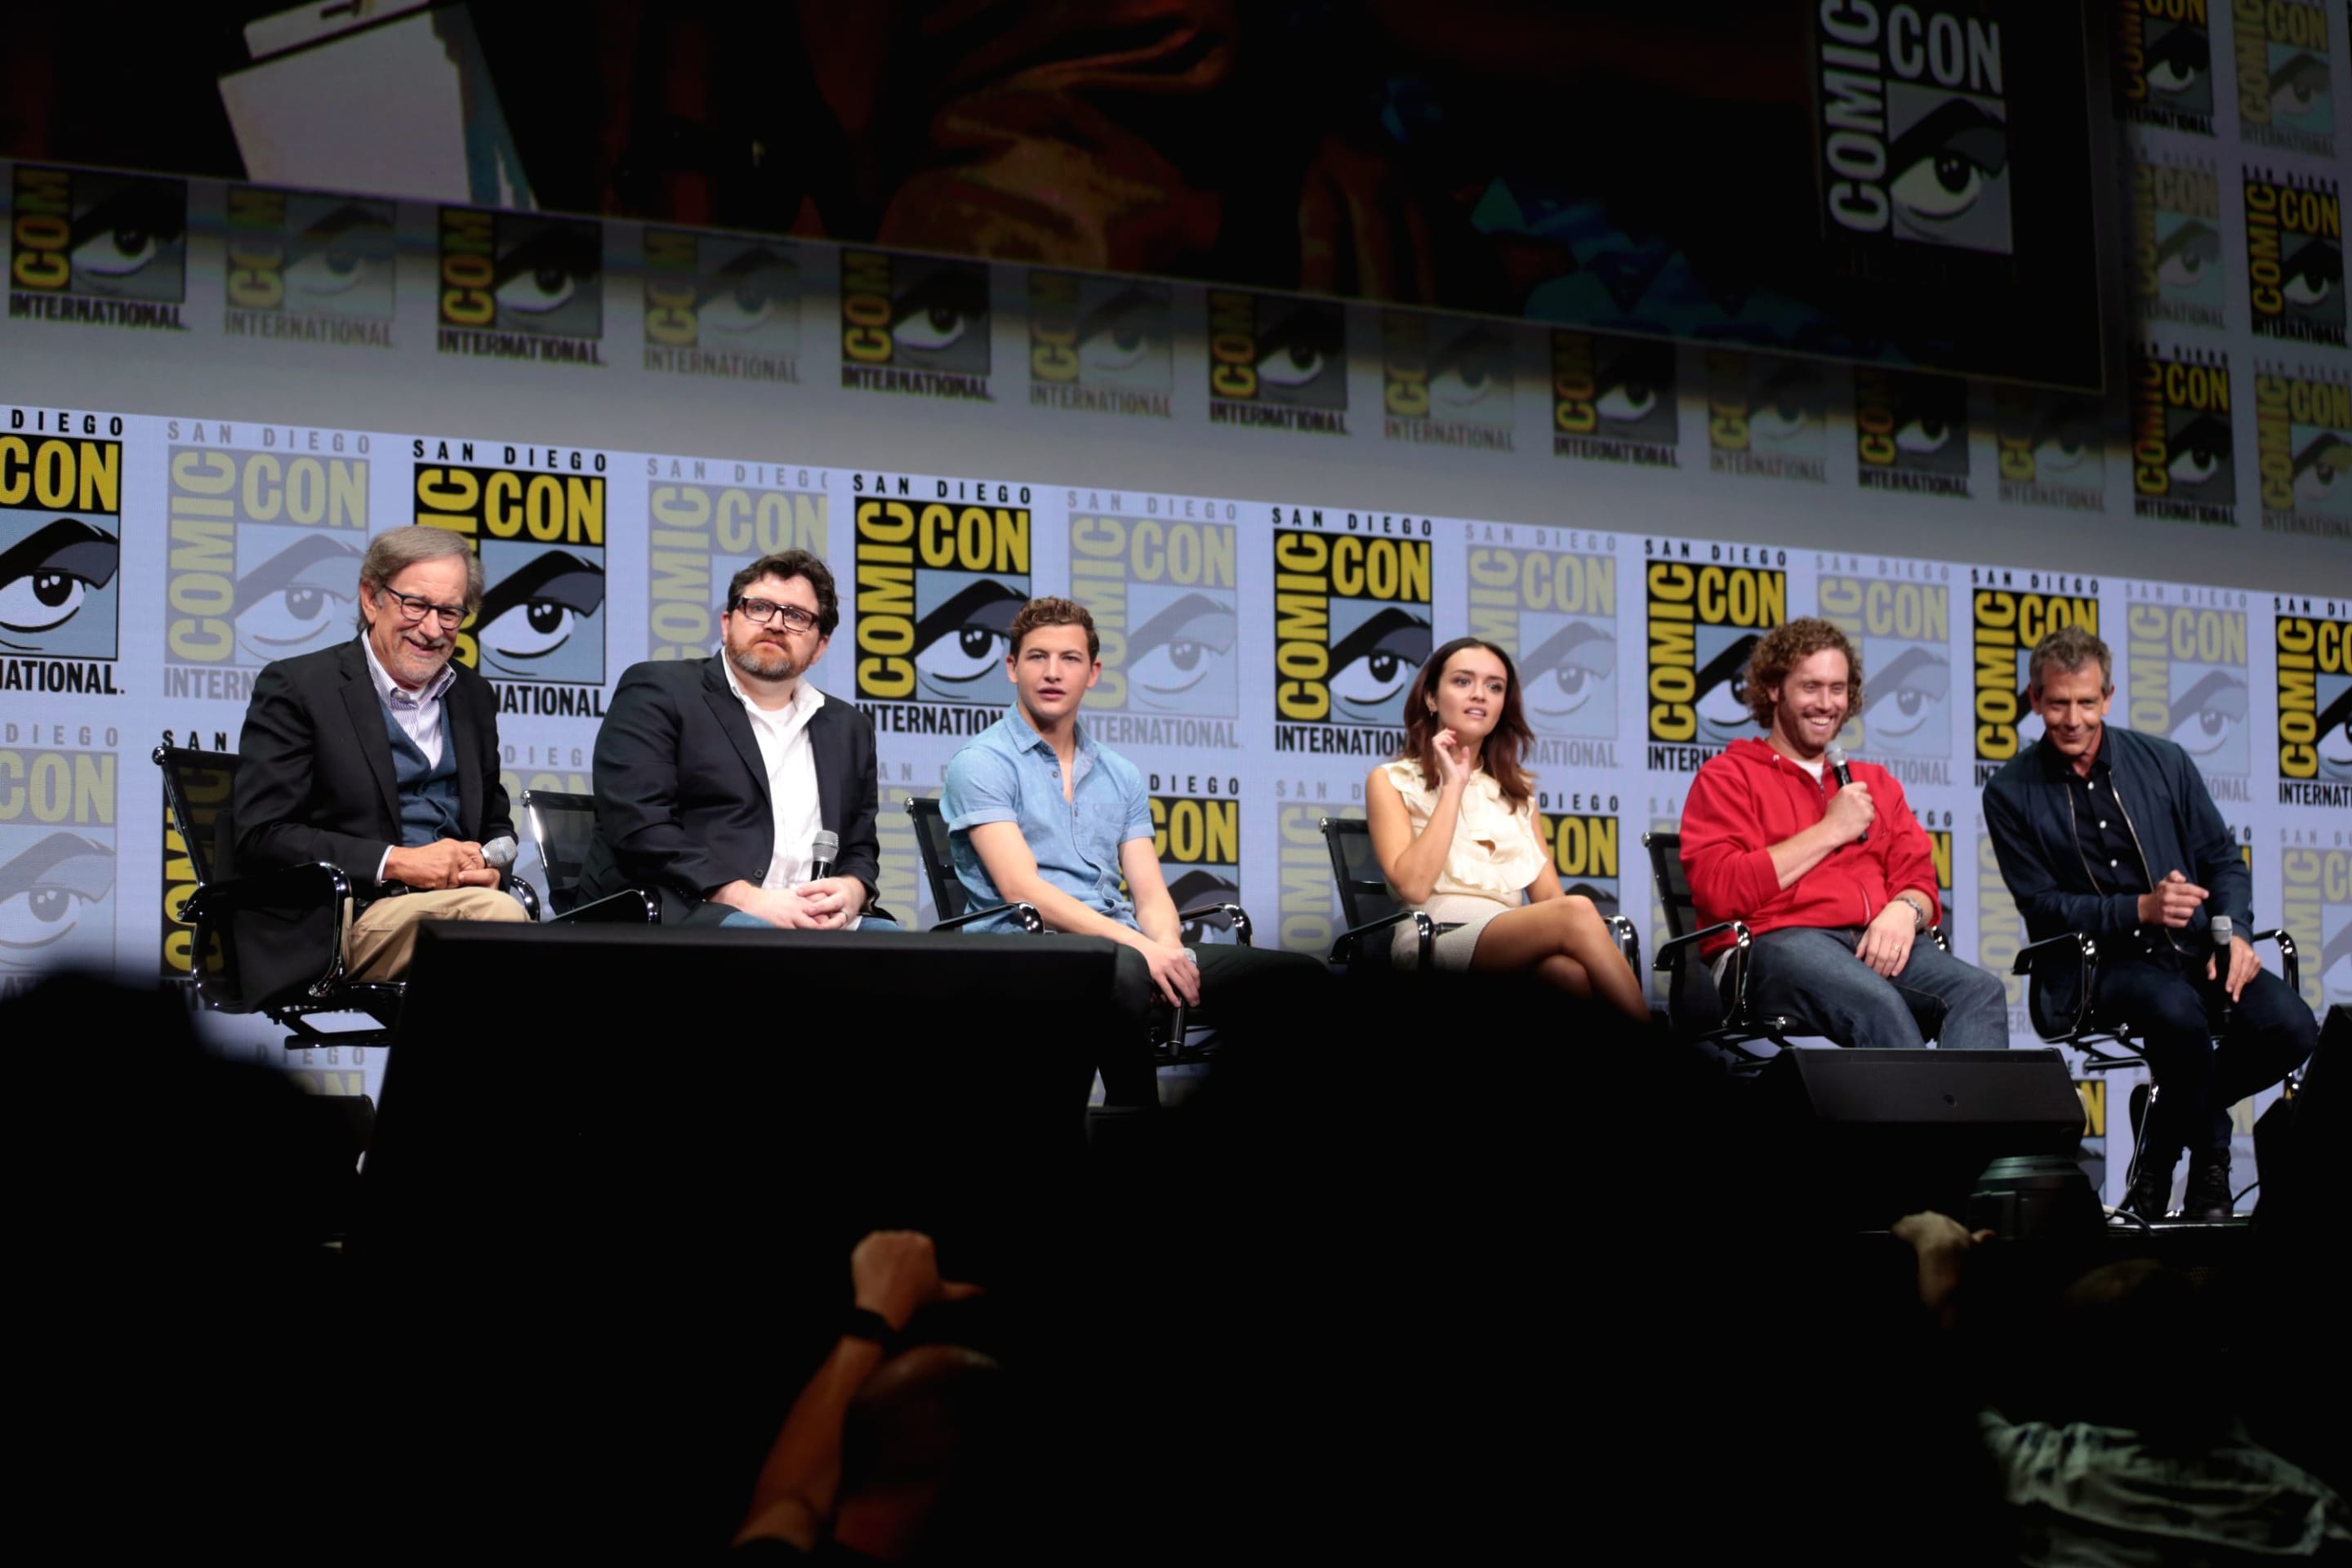 Director Steven Spielberg (far left) and Ernest Cline with the cast of Ready Player One at San Diego Comic-Con